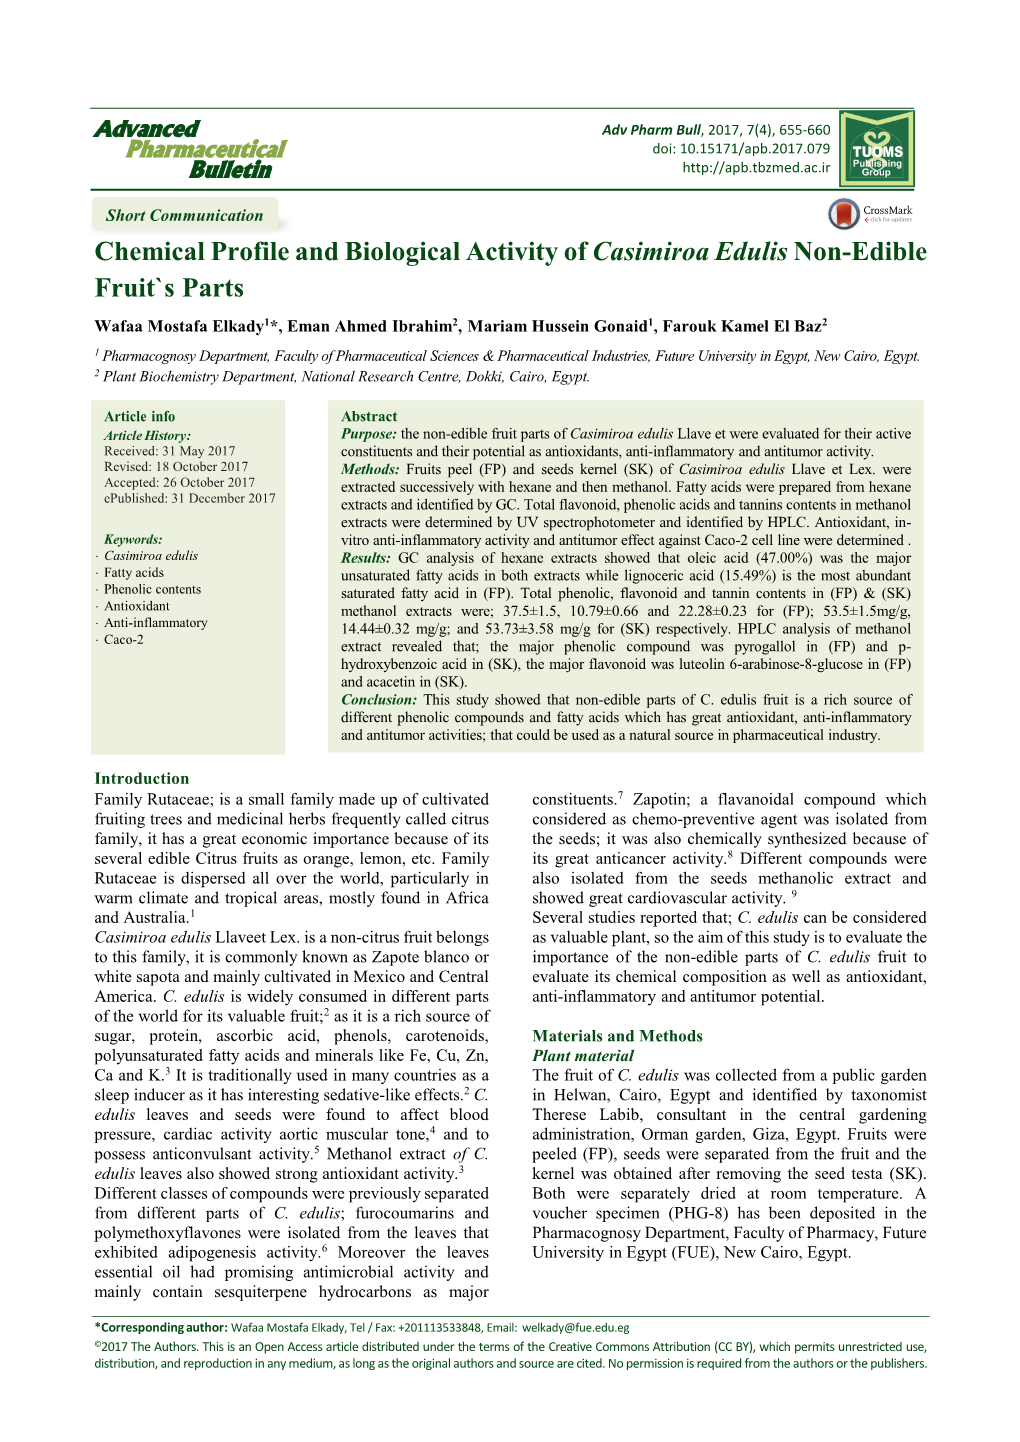 Chemical Profile and Biological Activity of Casimiroa Edulis Non